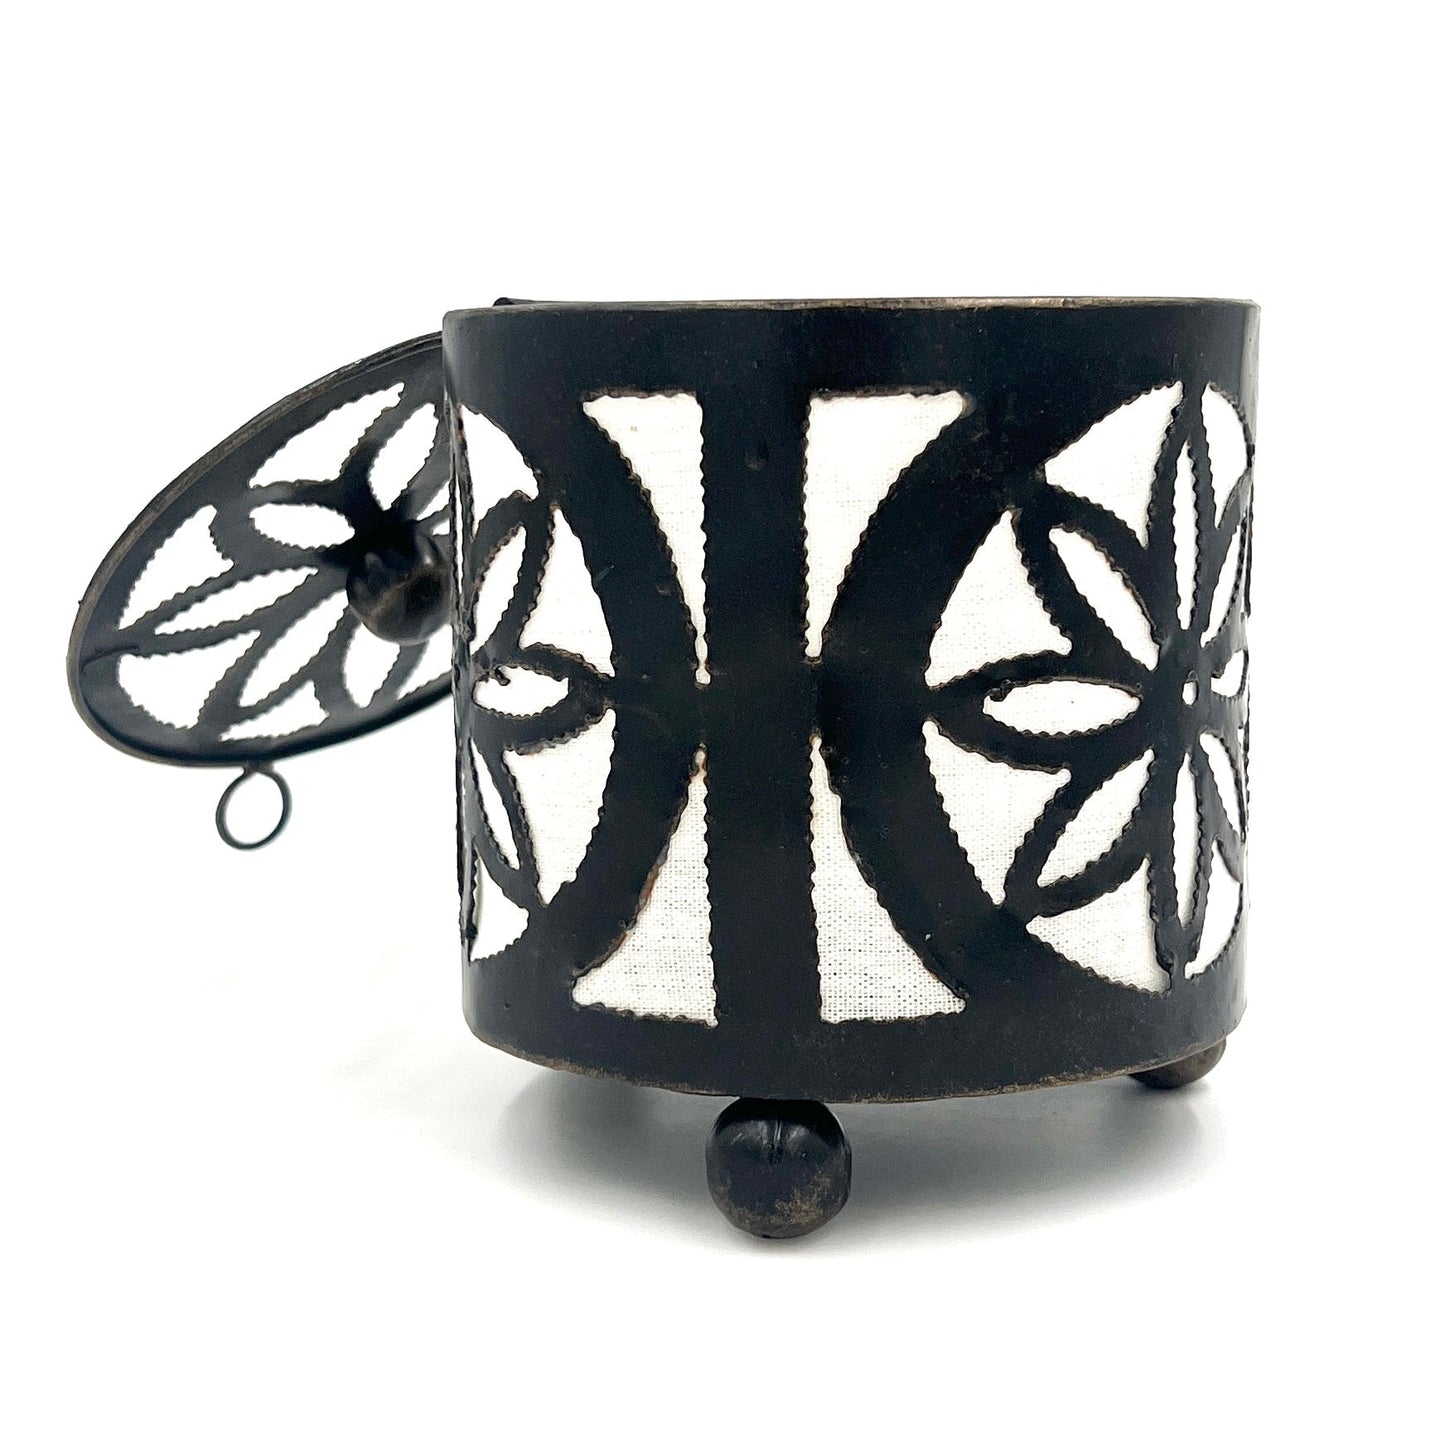 Handcut Flower Iron Candle Holders w/ Lid